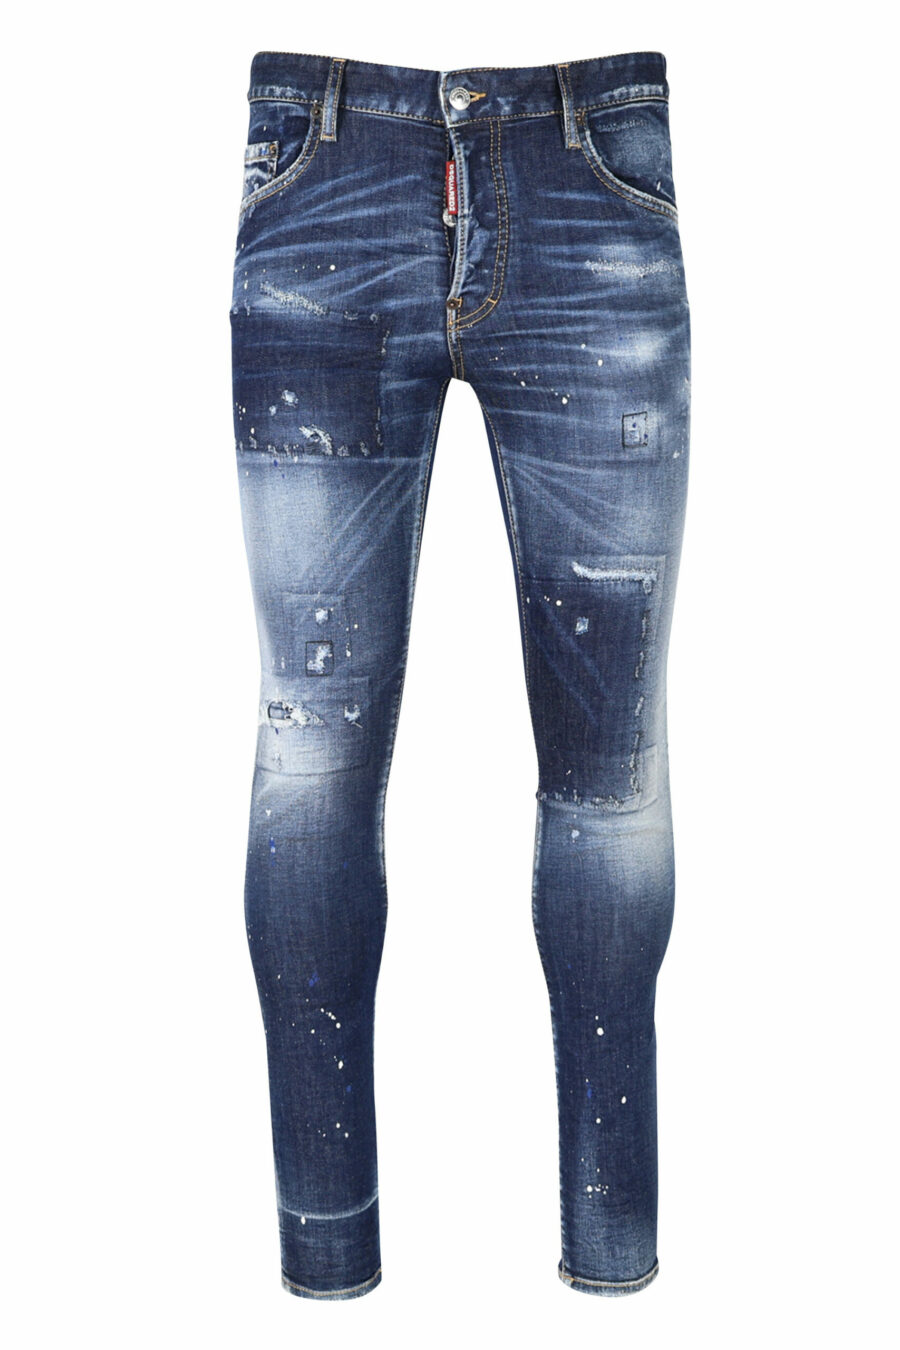 Blue "super twinky jean" jeans with patch and frayed - 8054148104863 scaled